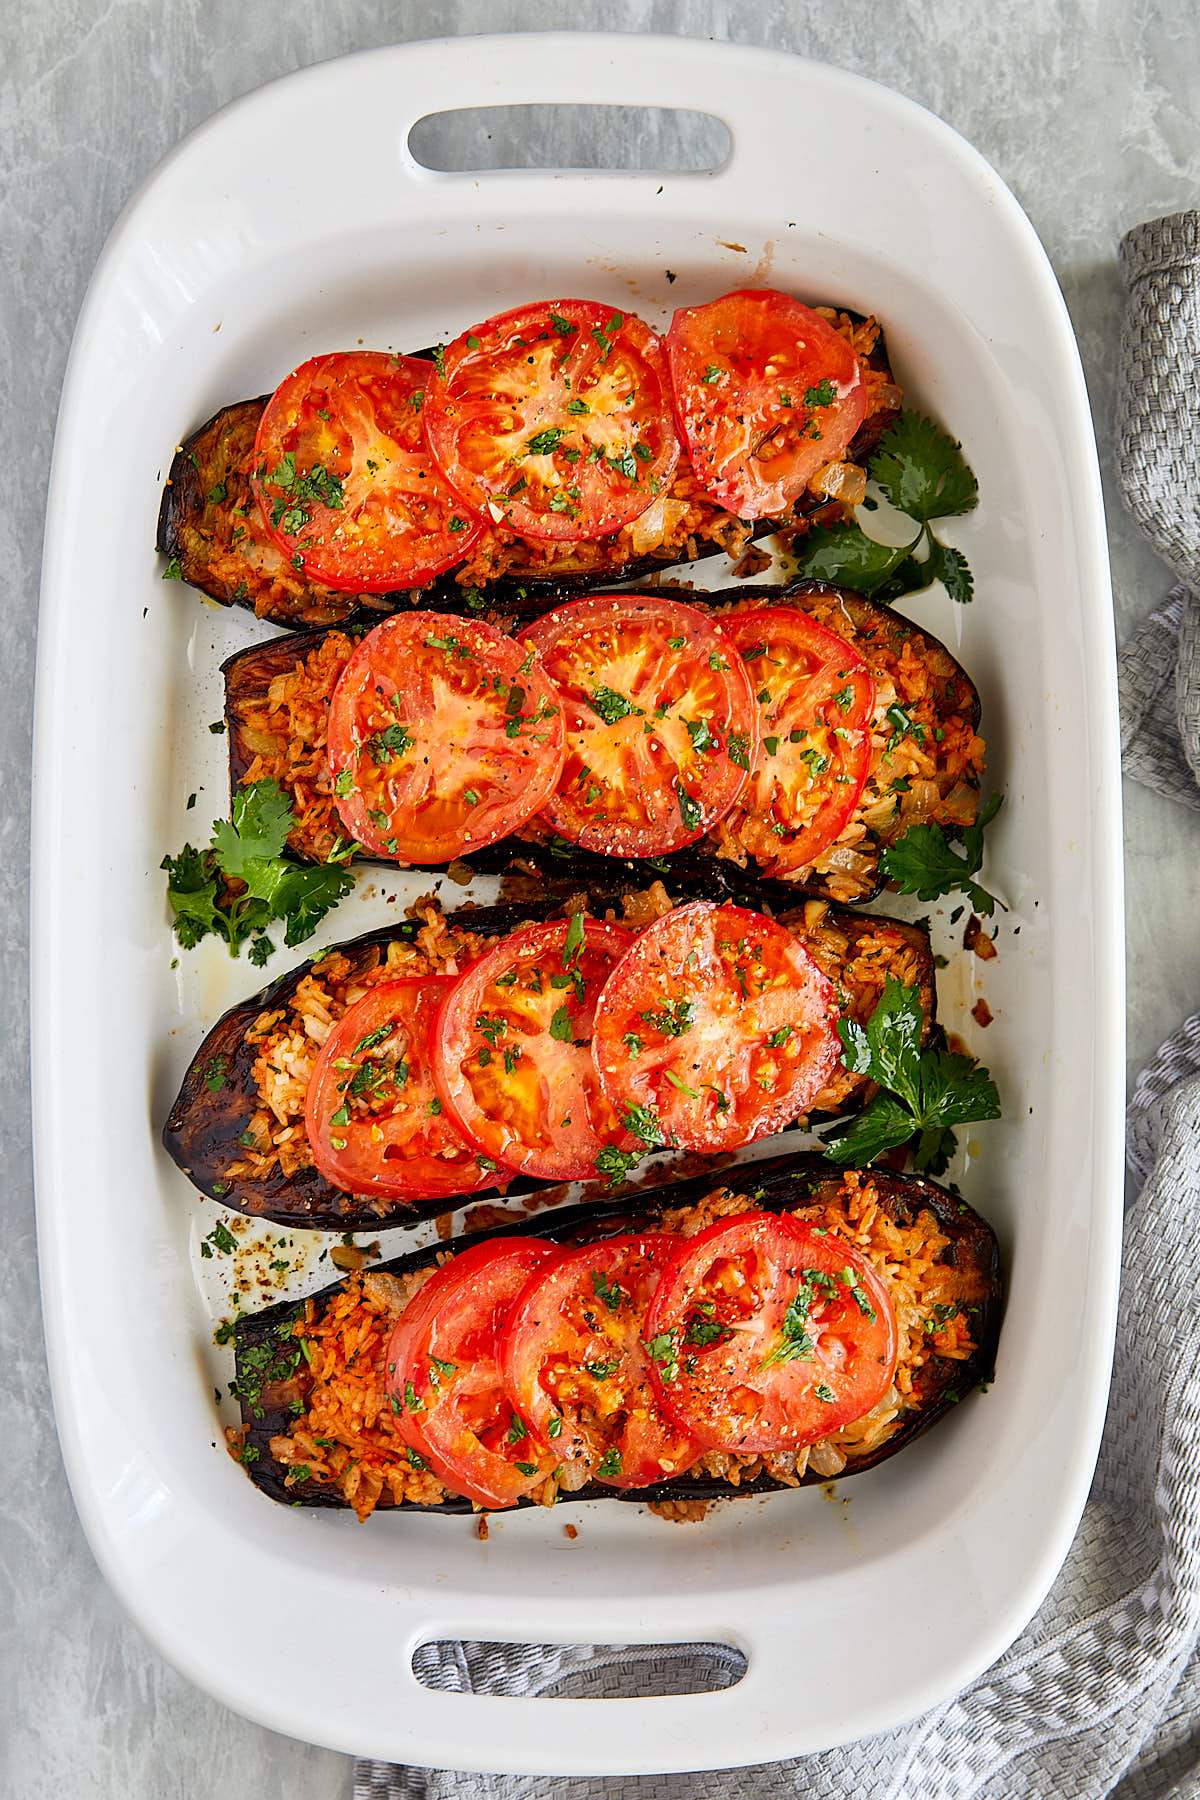 Fried Eggplant with Rice and Tomatoes | ifoodblogger.com #eggplant #friedeggplant #healthyrecipes #vegan #vegetarian #lowcarb